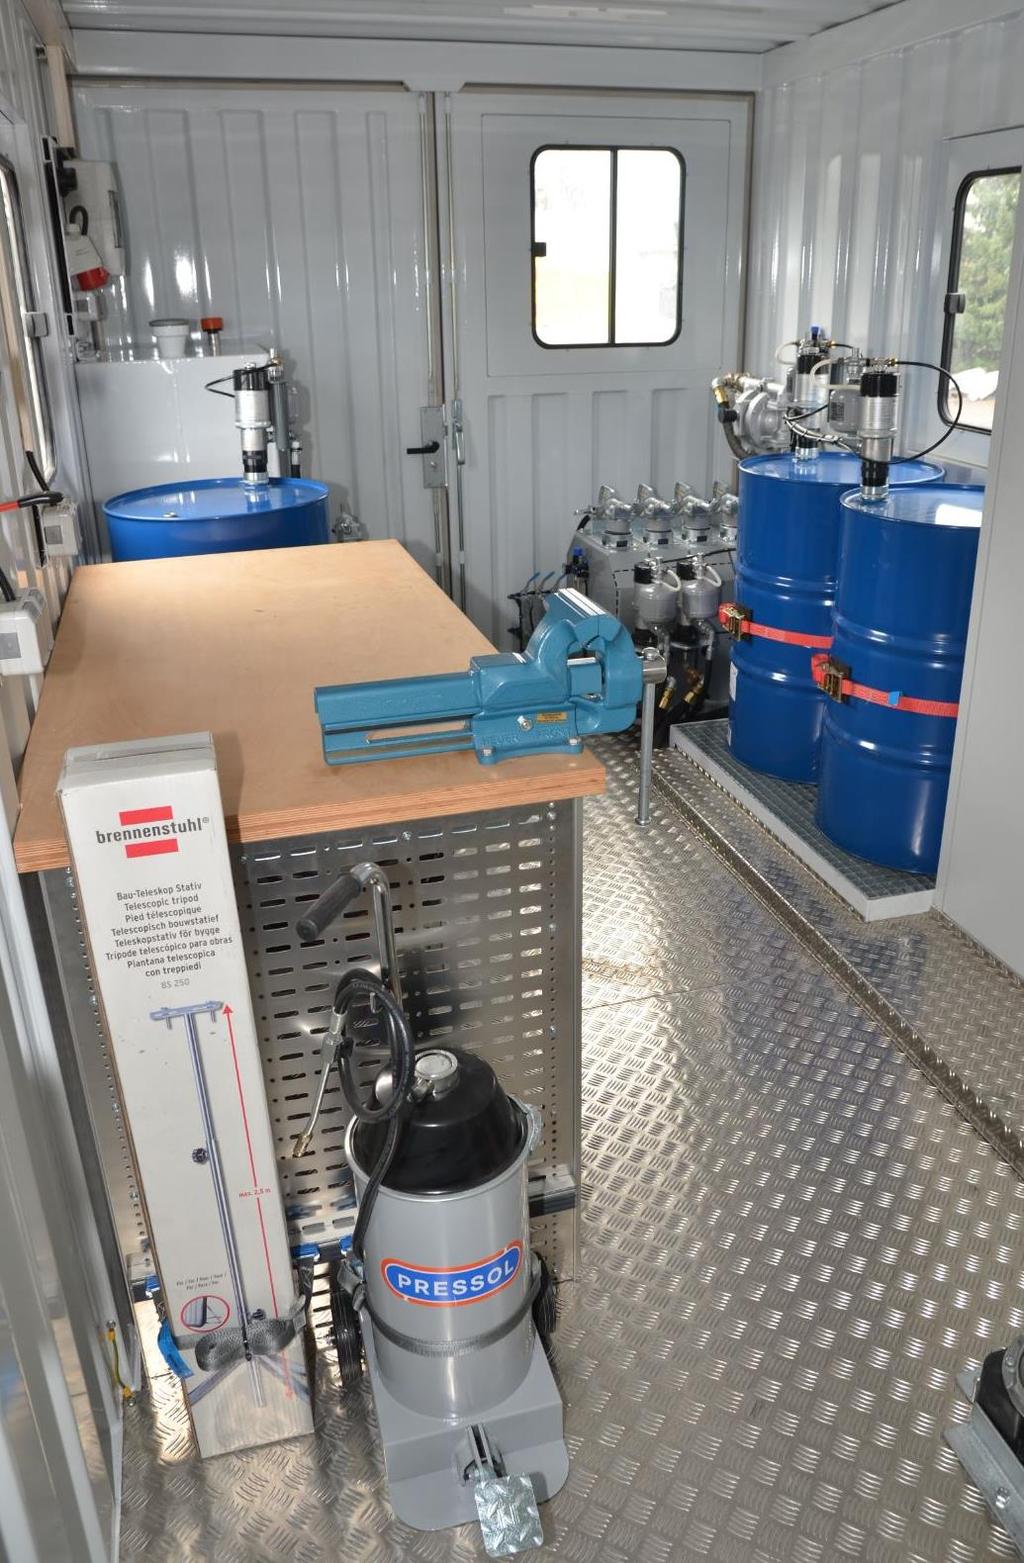 Overview of the workshop container with foot grease pump and workbench in front